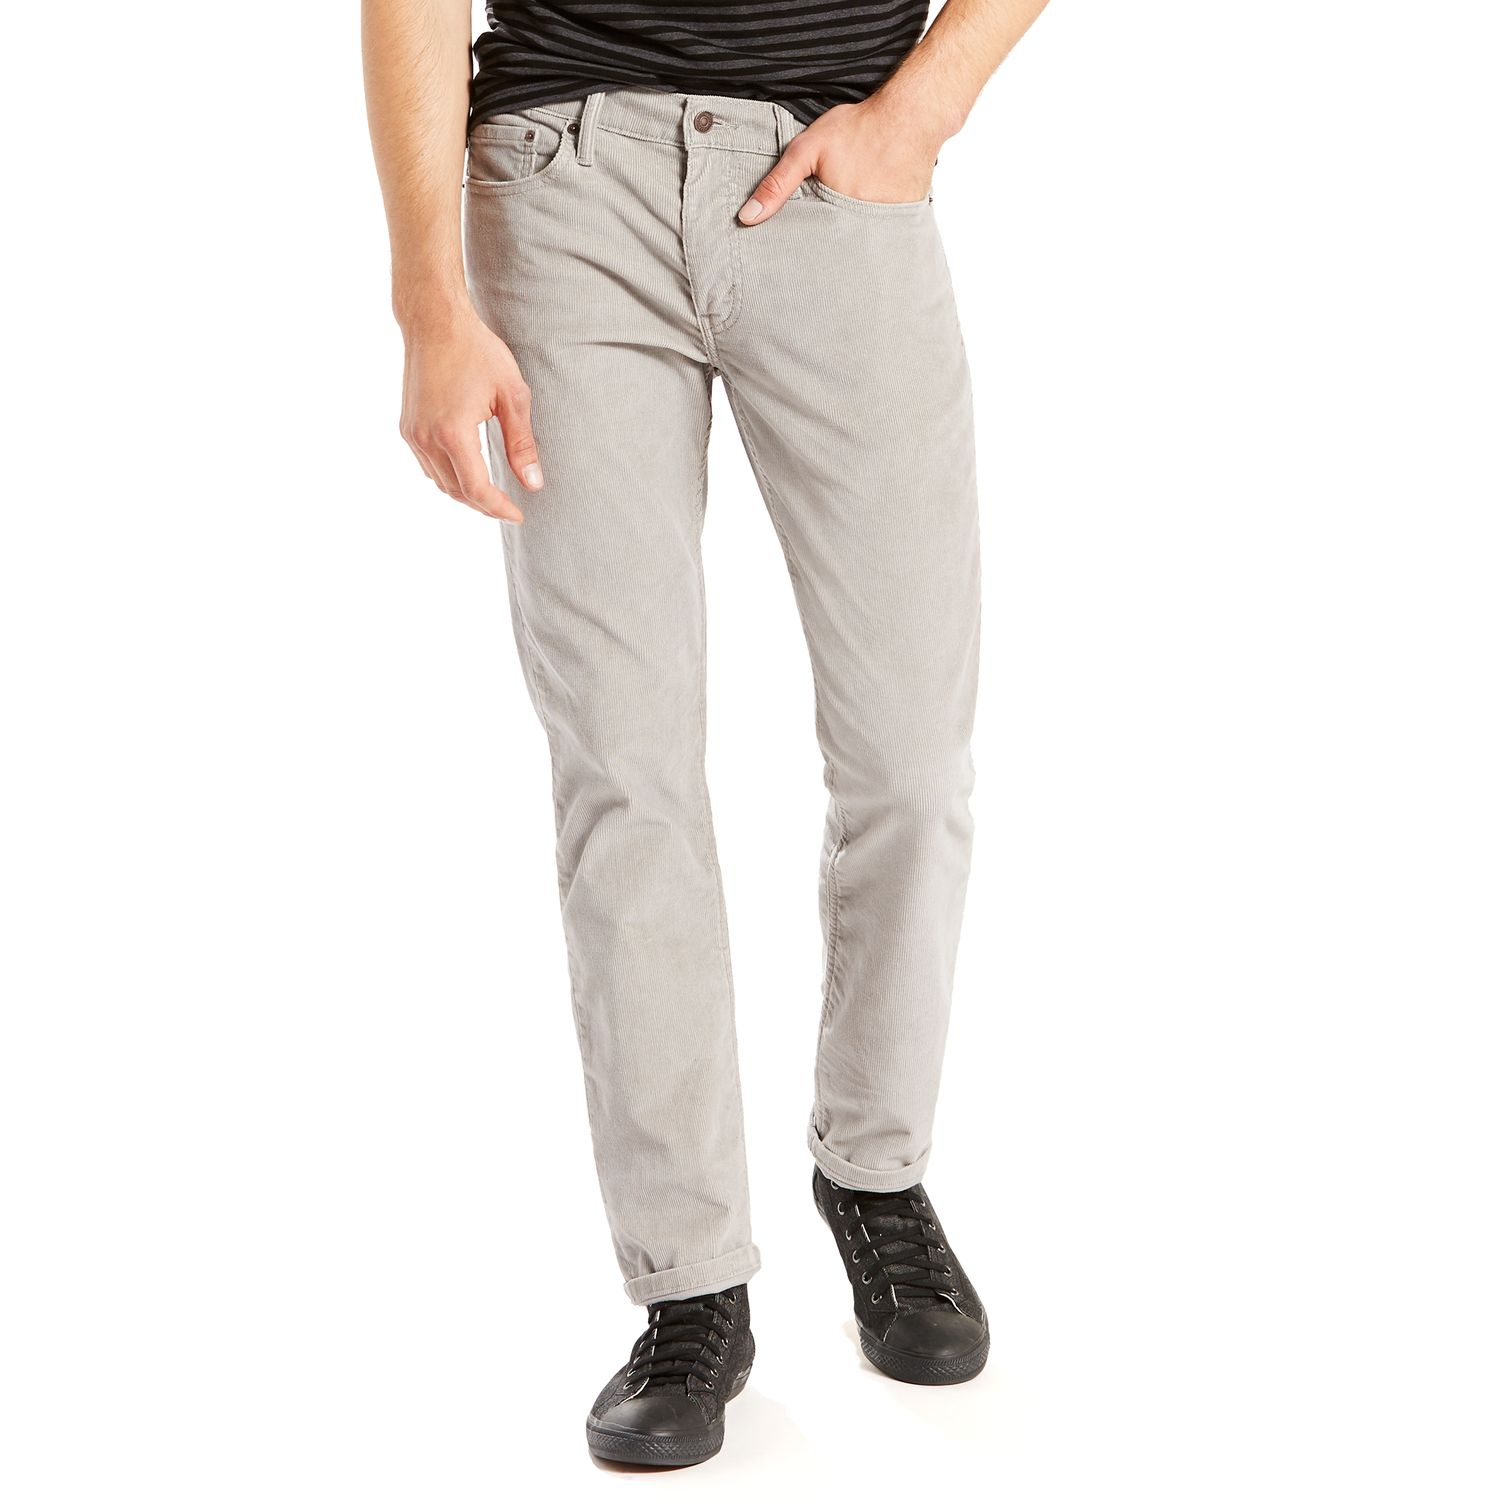 levi's 511 cord slim fit trousers